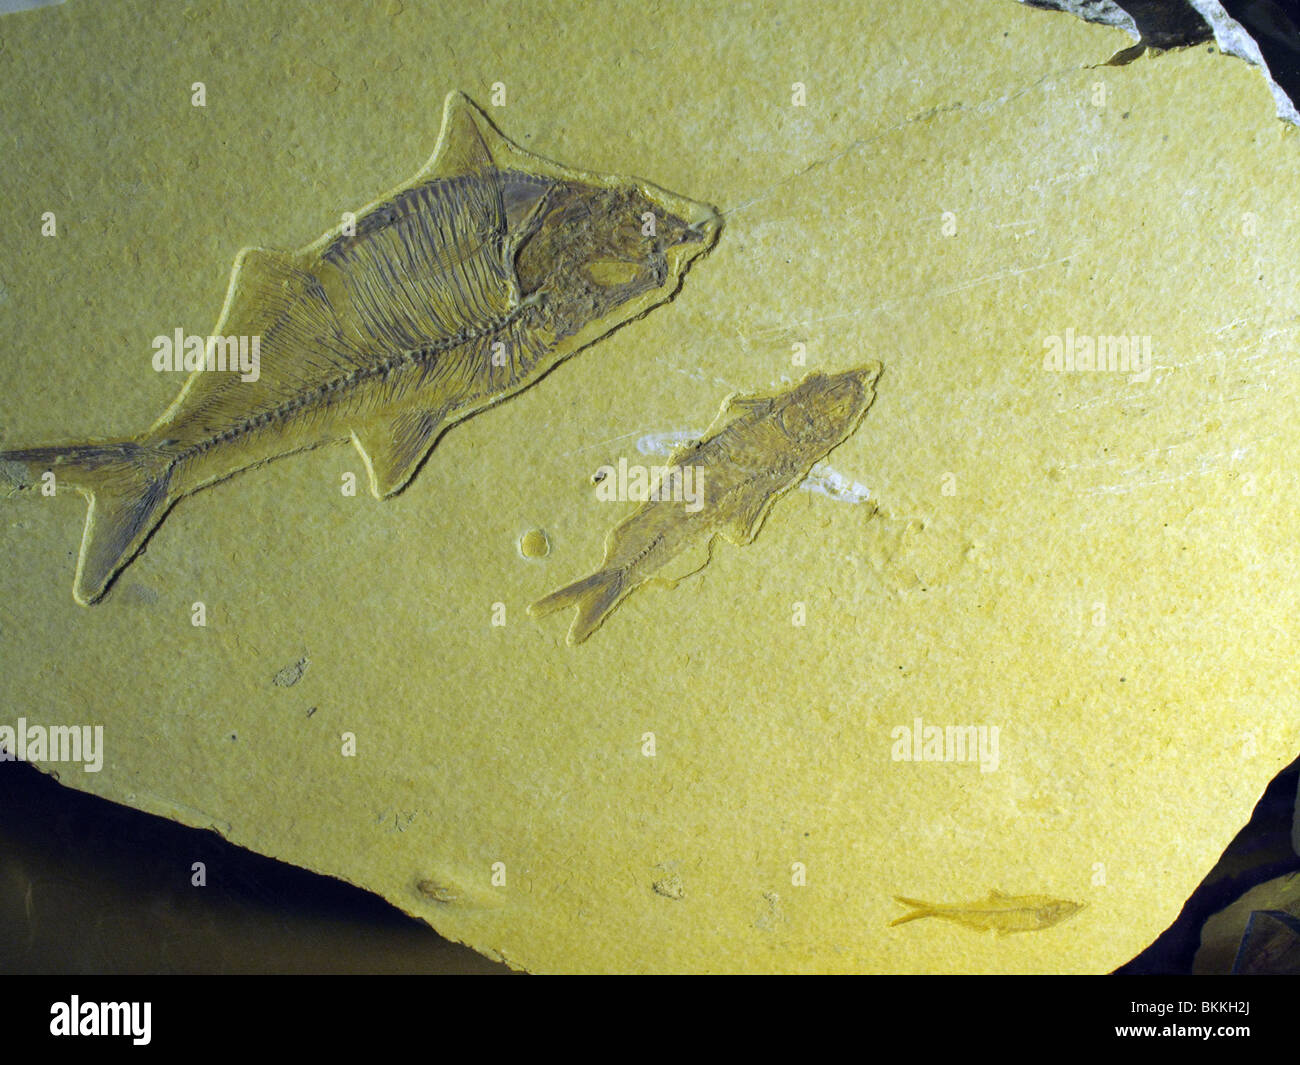 Imprinted fish fossil Stock Photo